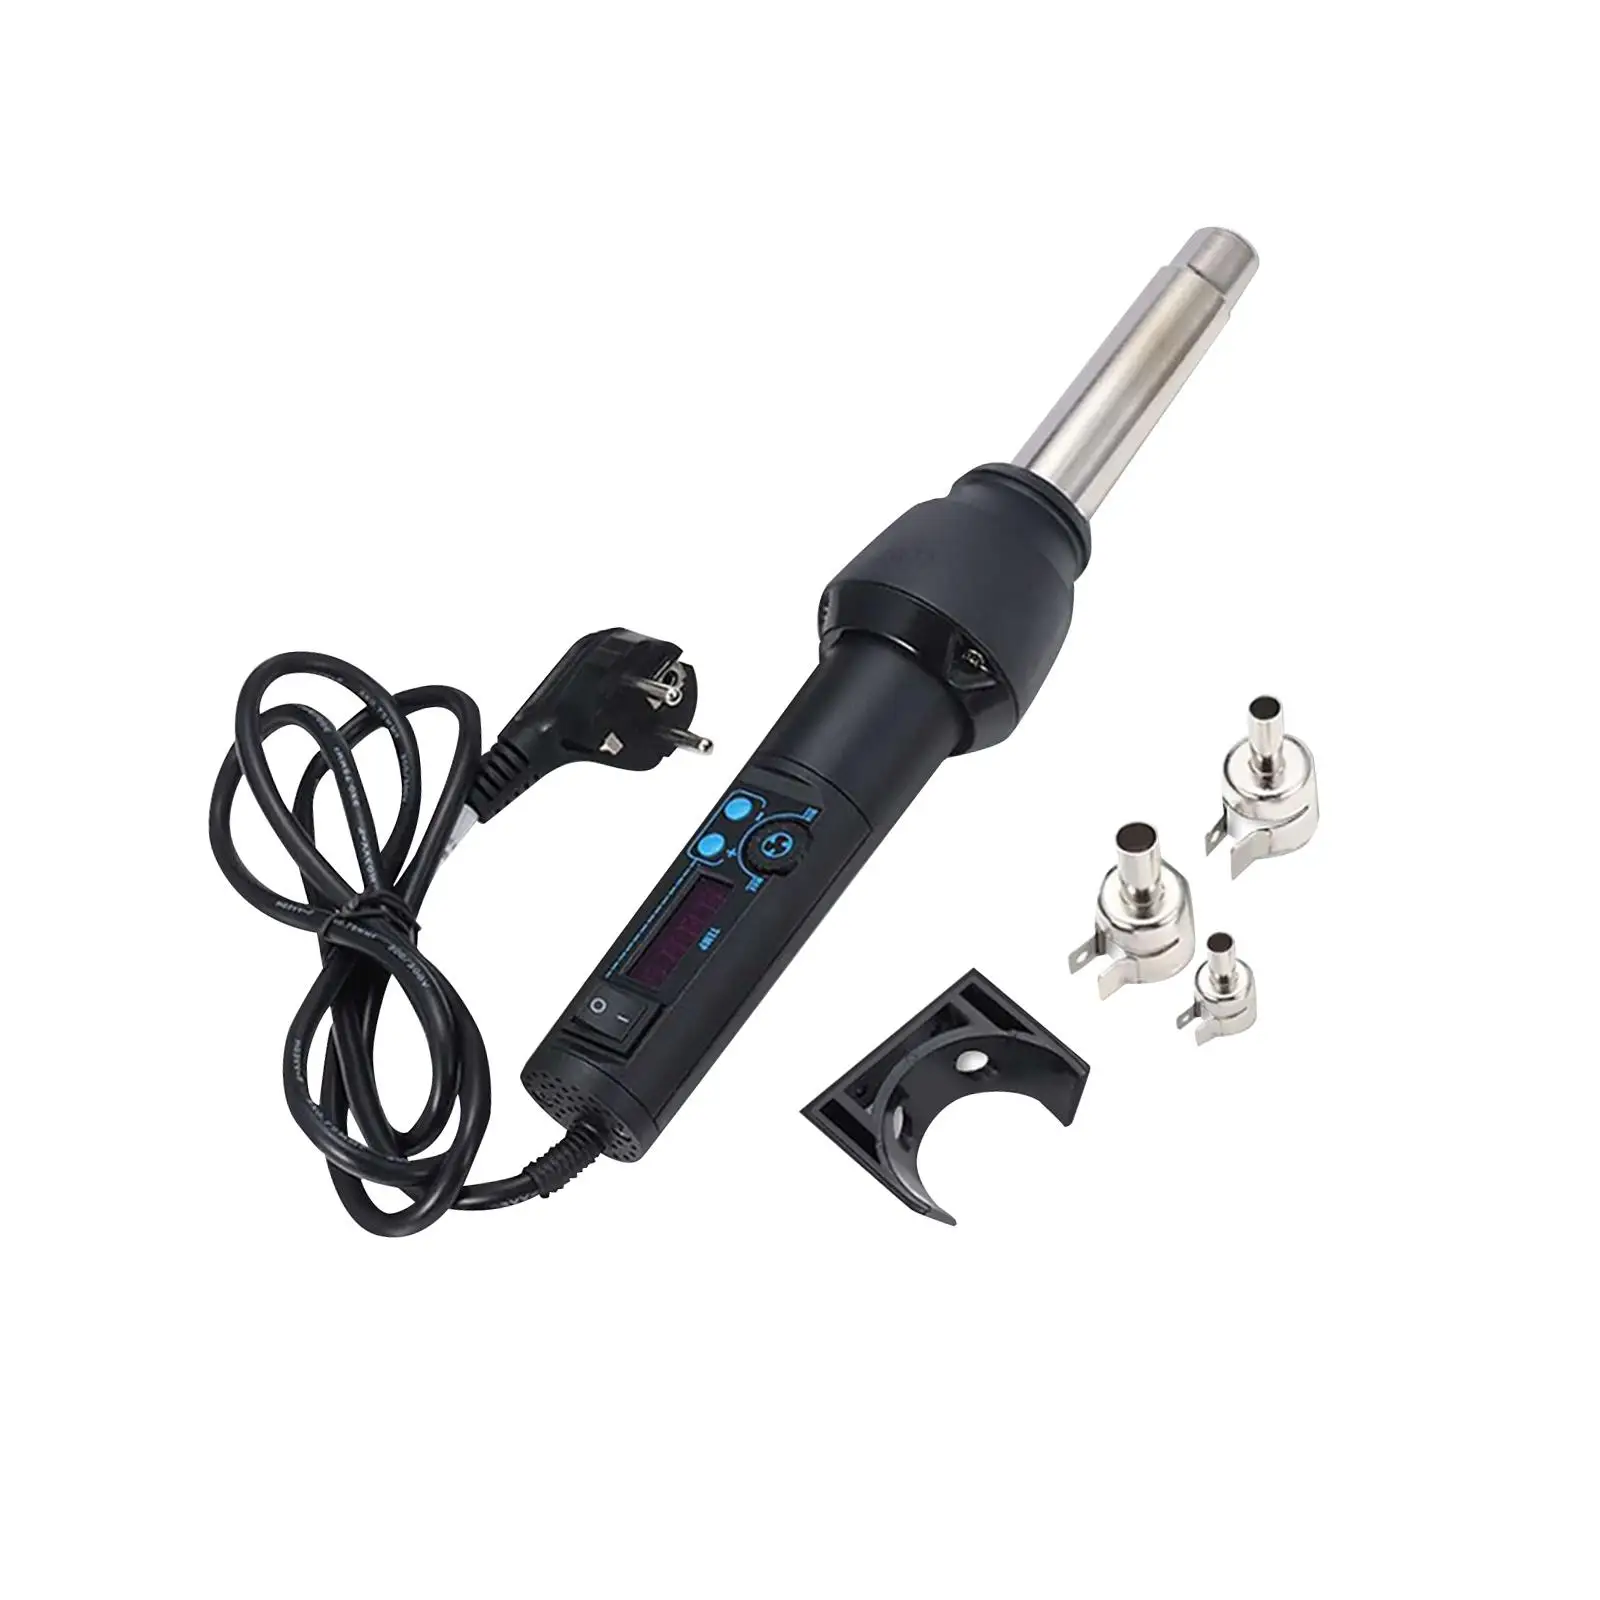 220V Hot Air Pen with Nozzle Overload Protection Fast Heating Digital Display 3 Temperature Settings Long Heat tool for